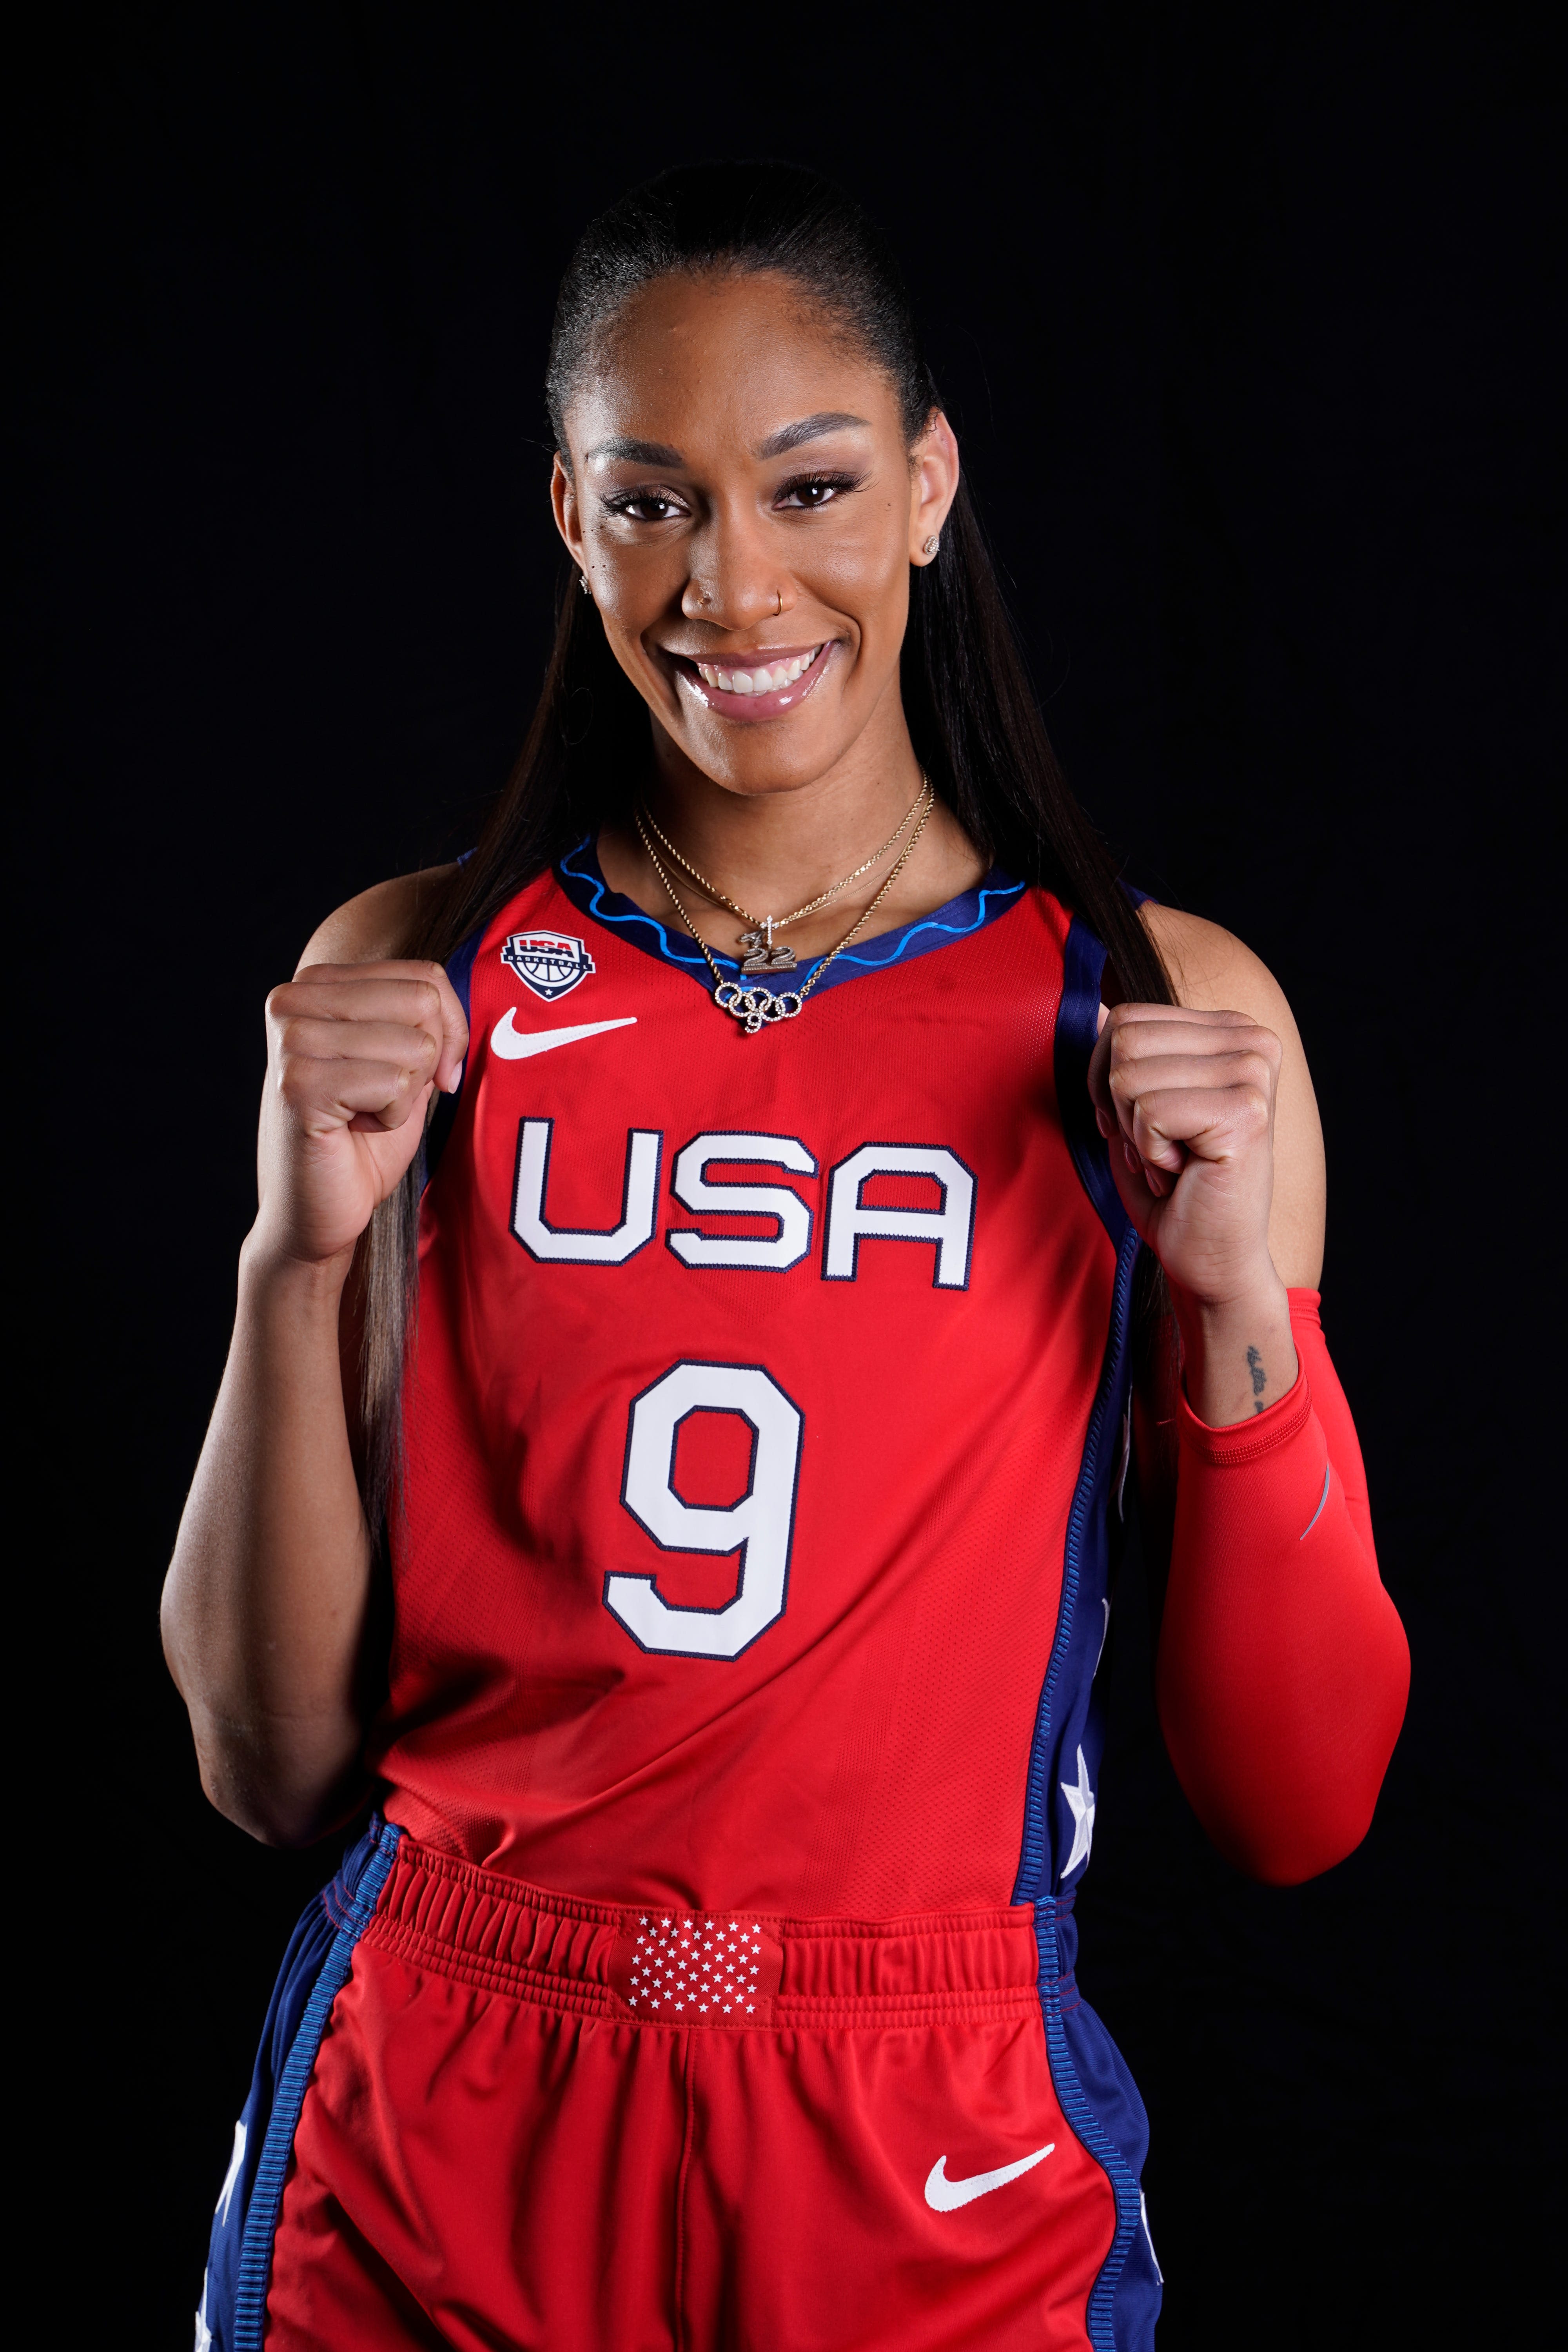 Is A'ja Wilson playing today? Paris Olympics women's basketball schedule for July 29